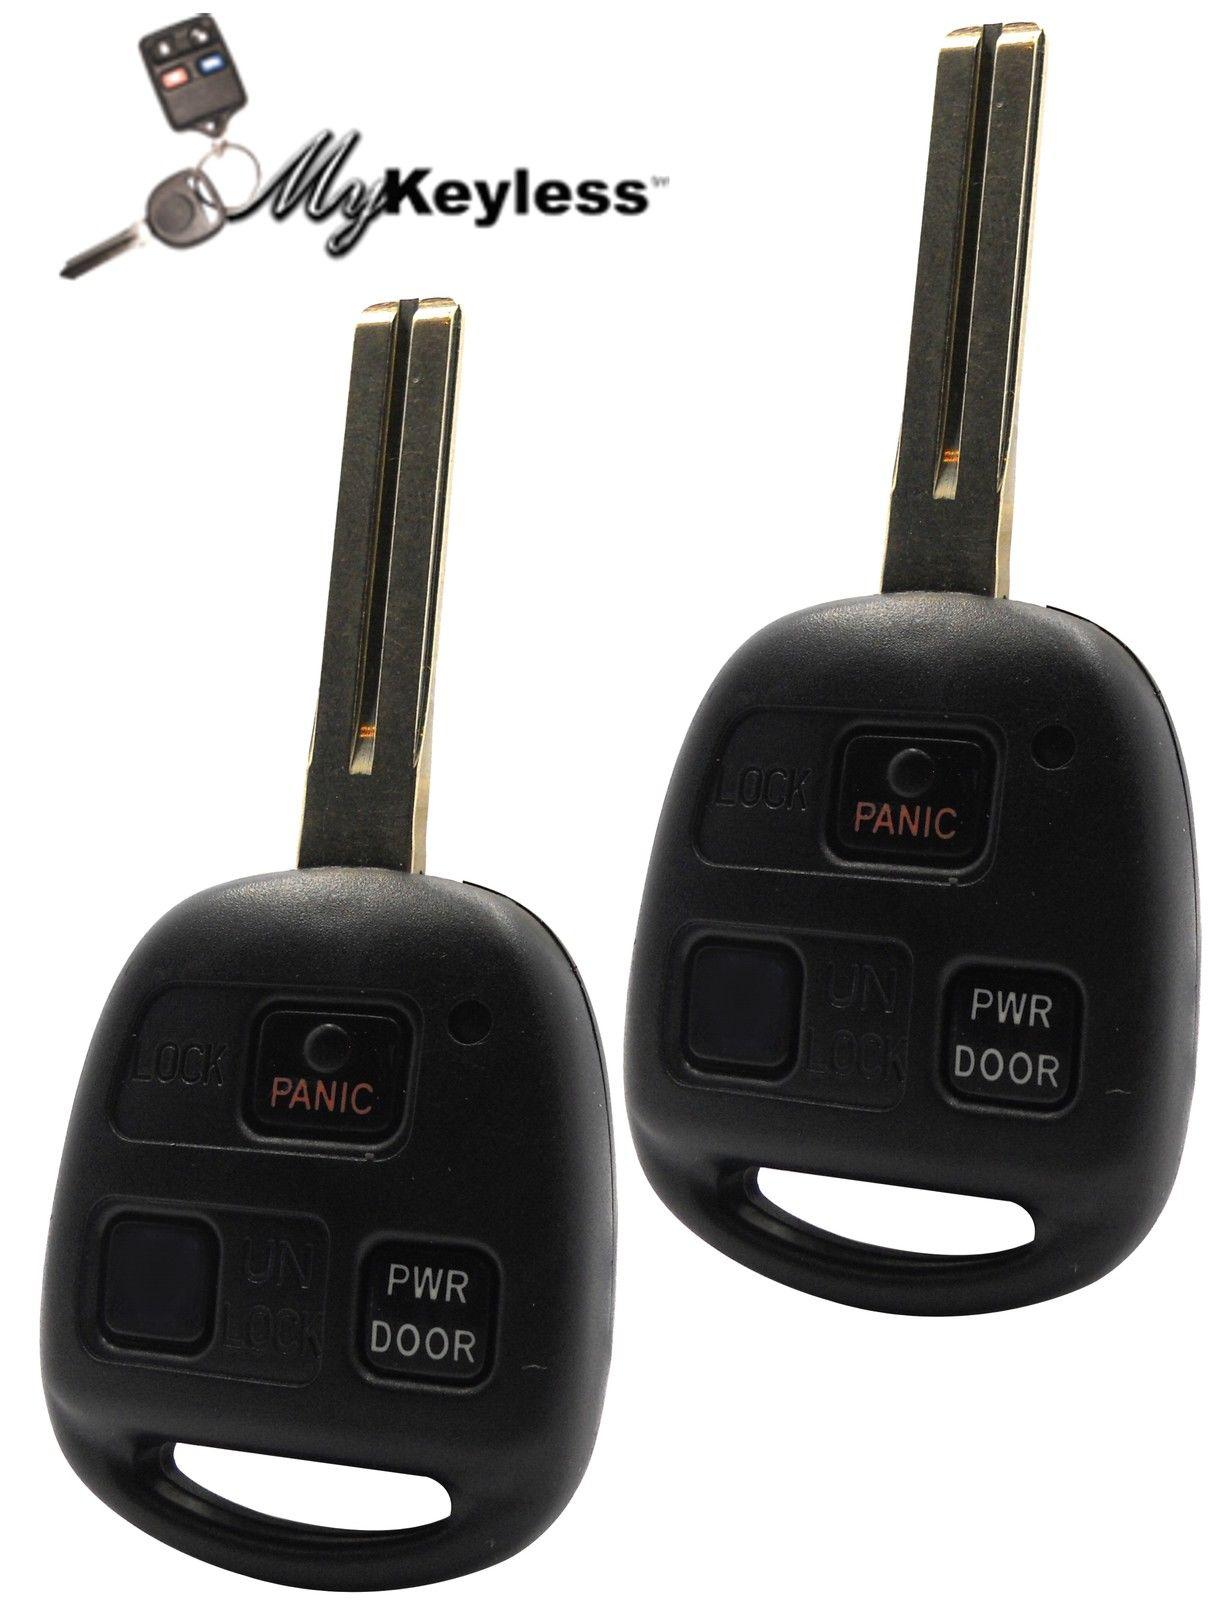 New lexus replacement key keyless entry remote keyfob fob combo - 3 button pair